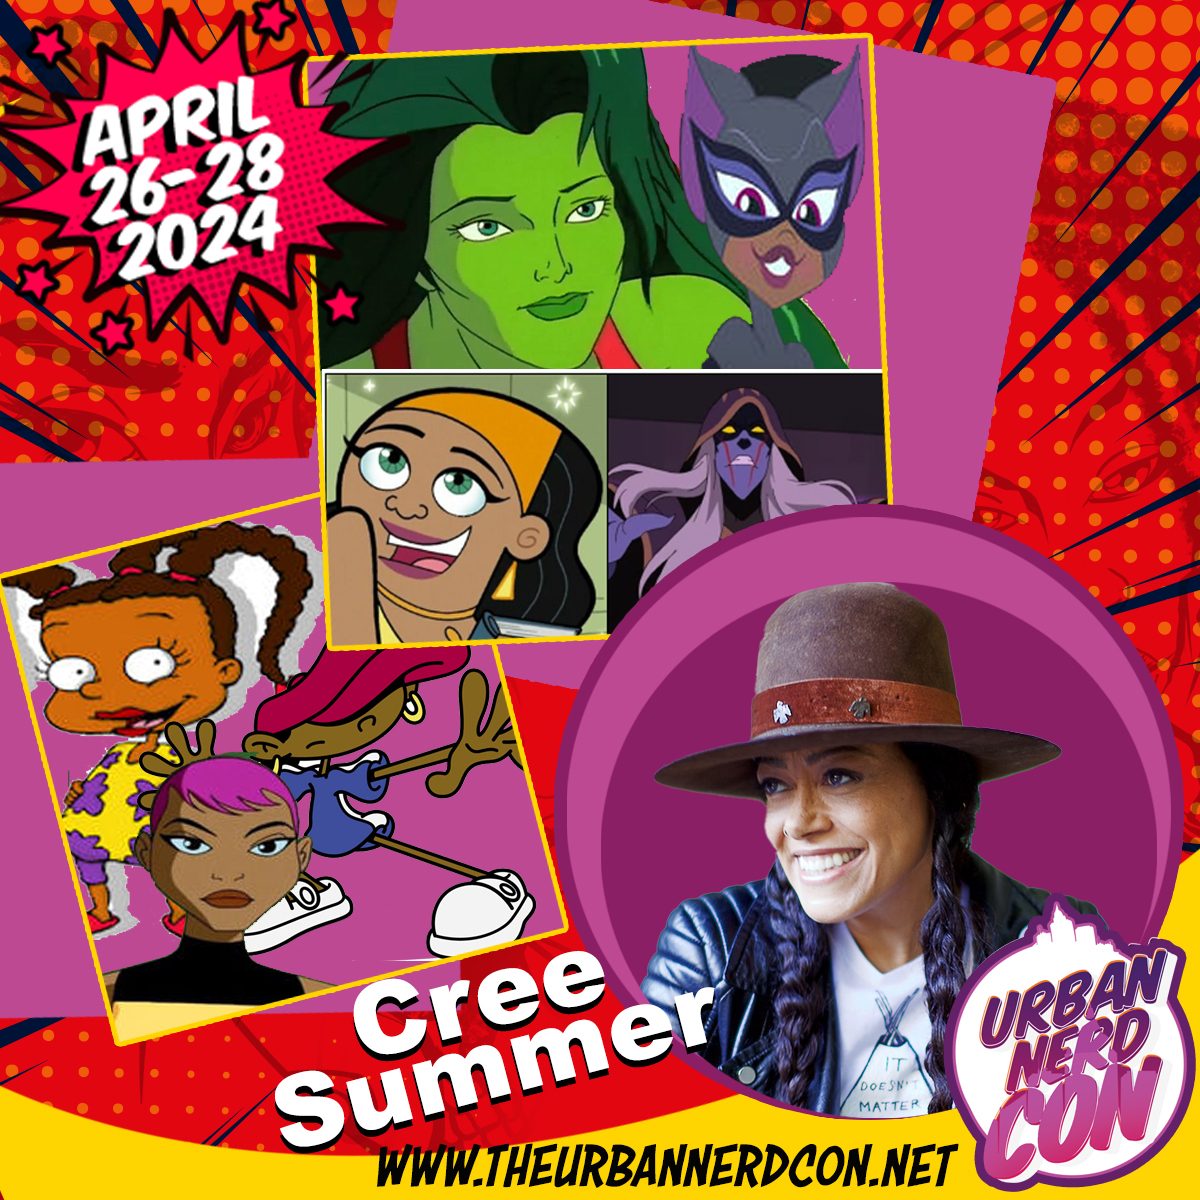 And Let's Run It Back!!! Nope is wan NOT an April Fools joke! The voice Queen will be in the building! @IAmCreeSummer will be at The Urban Nerd Con 2024! So get your badges to come meet Freddie, #5, Sussie and more! Get Those Badges!! theurbannerdcon.net/badges.html